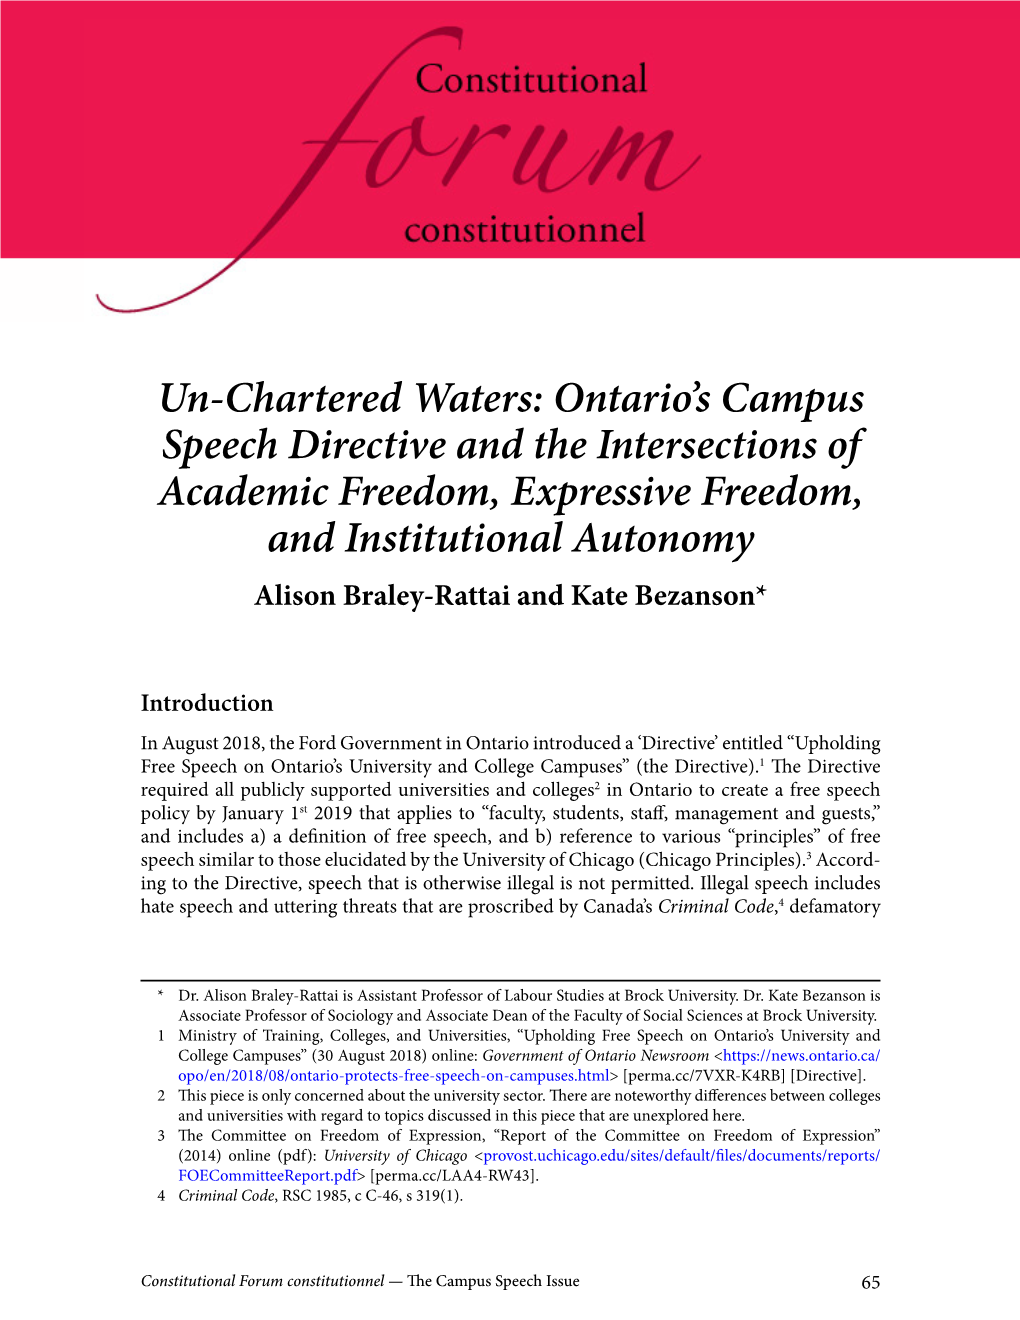 Un-Chartered Waters: Ontario's Campus Speech Directive and The